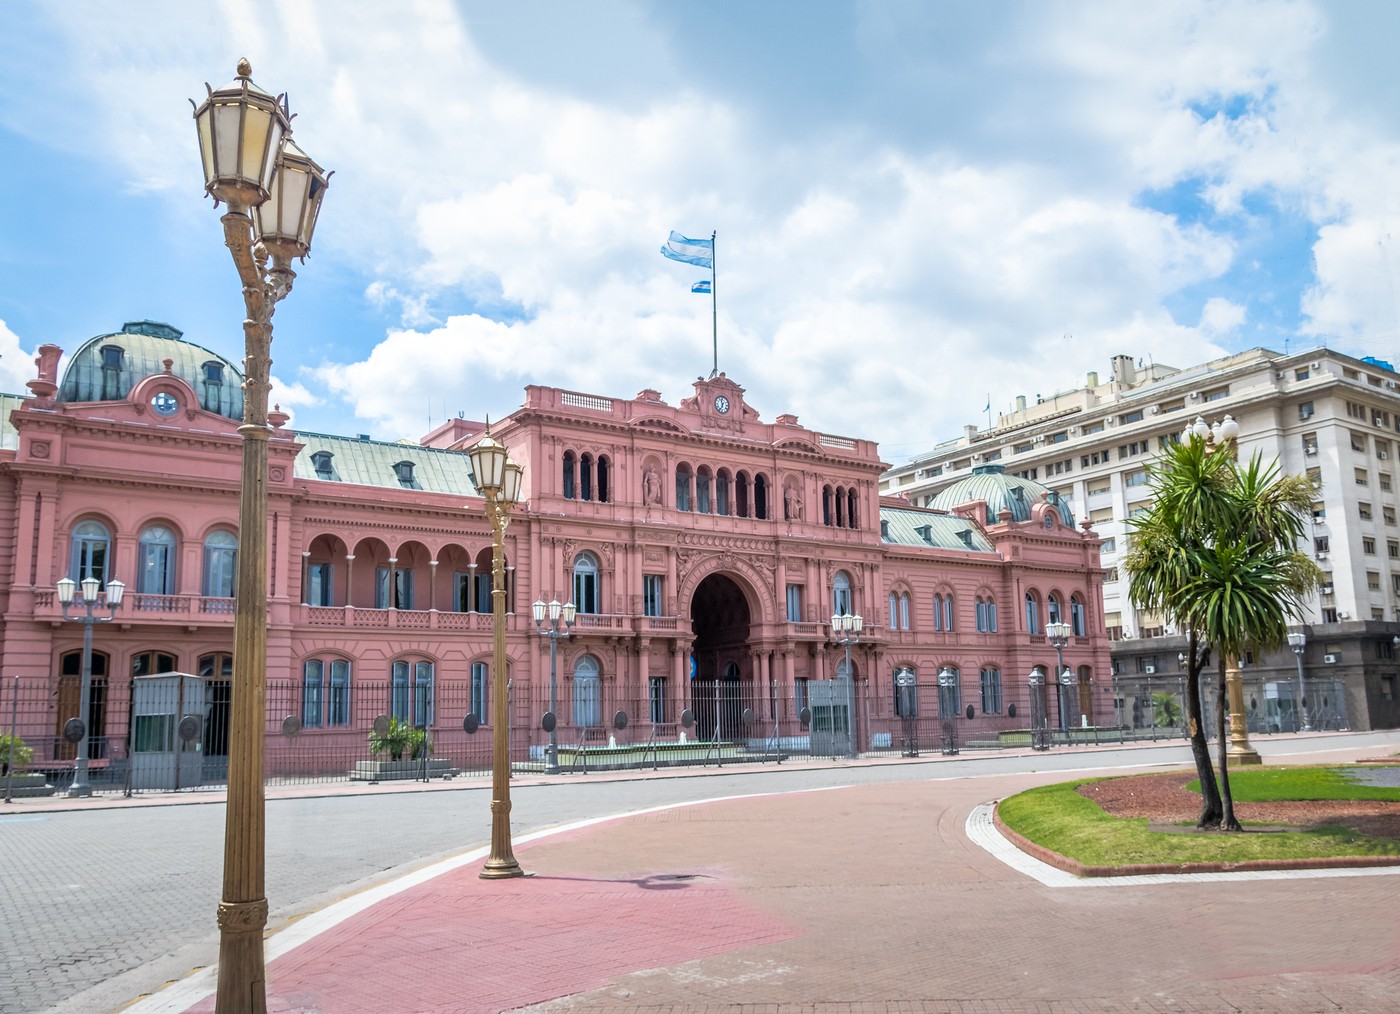 Casa Rosada (Pink House), Argentinian Presidential Palace - Buenos Aires, Argentina (Foto: Getty Images/iStockphoto)